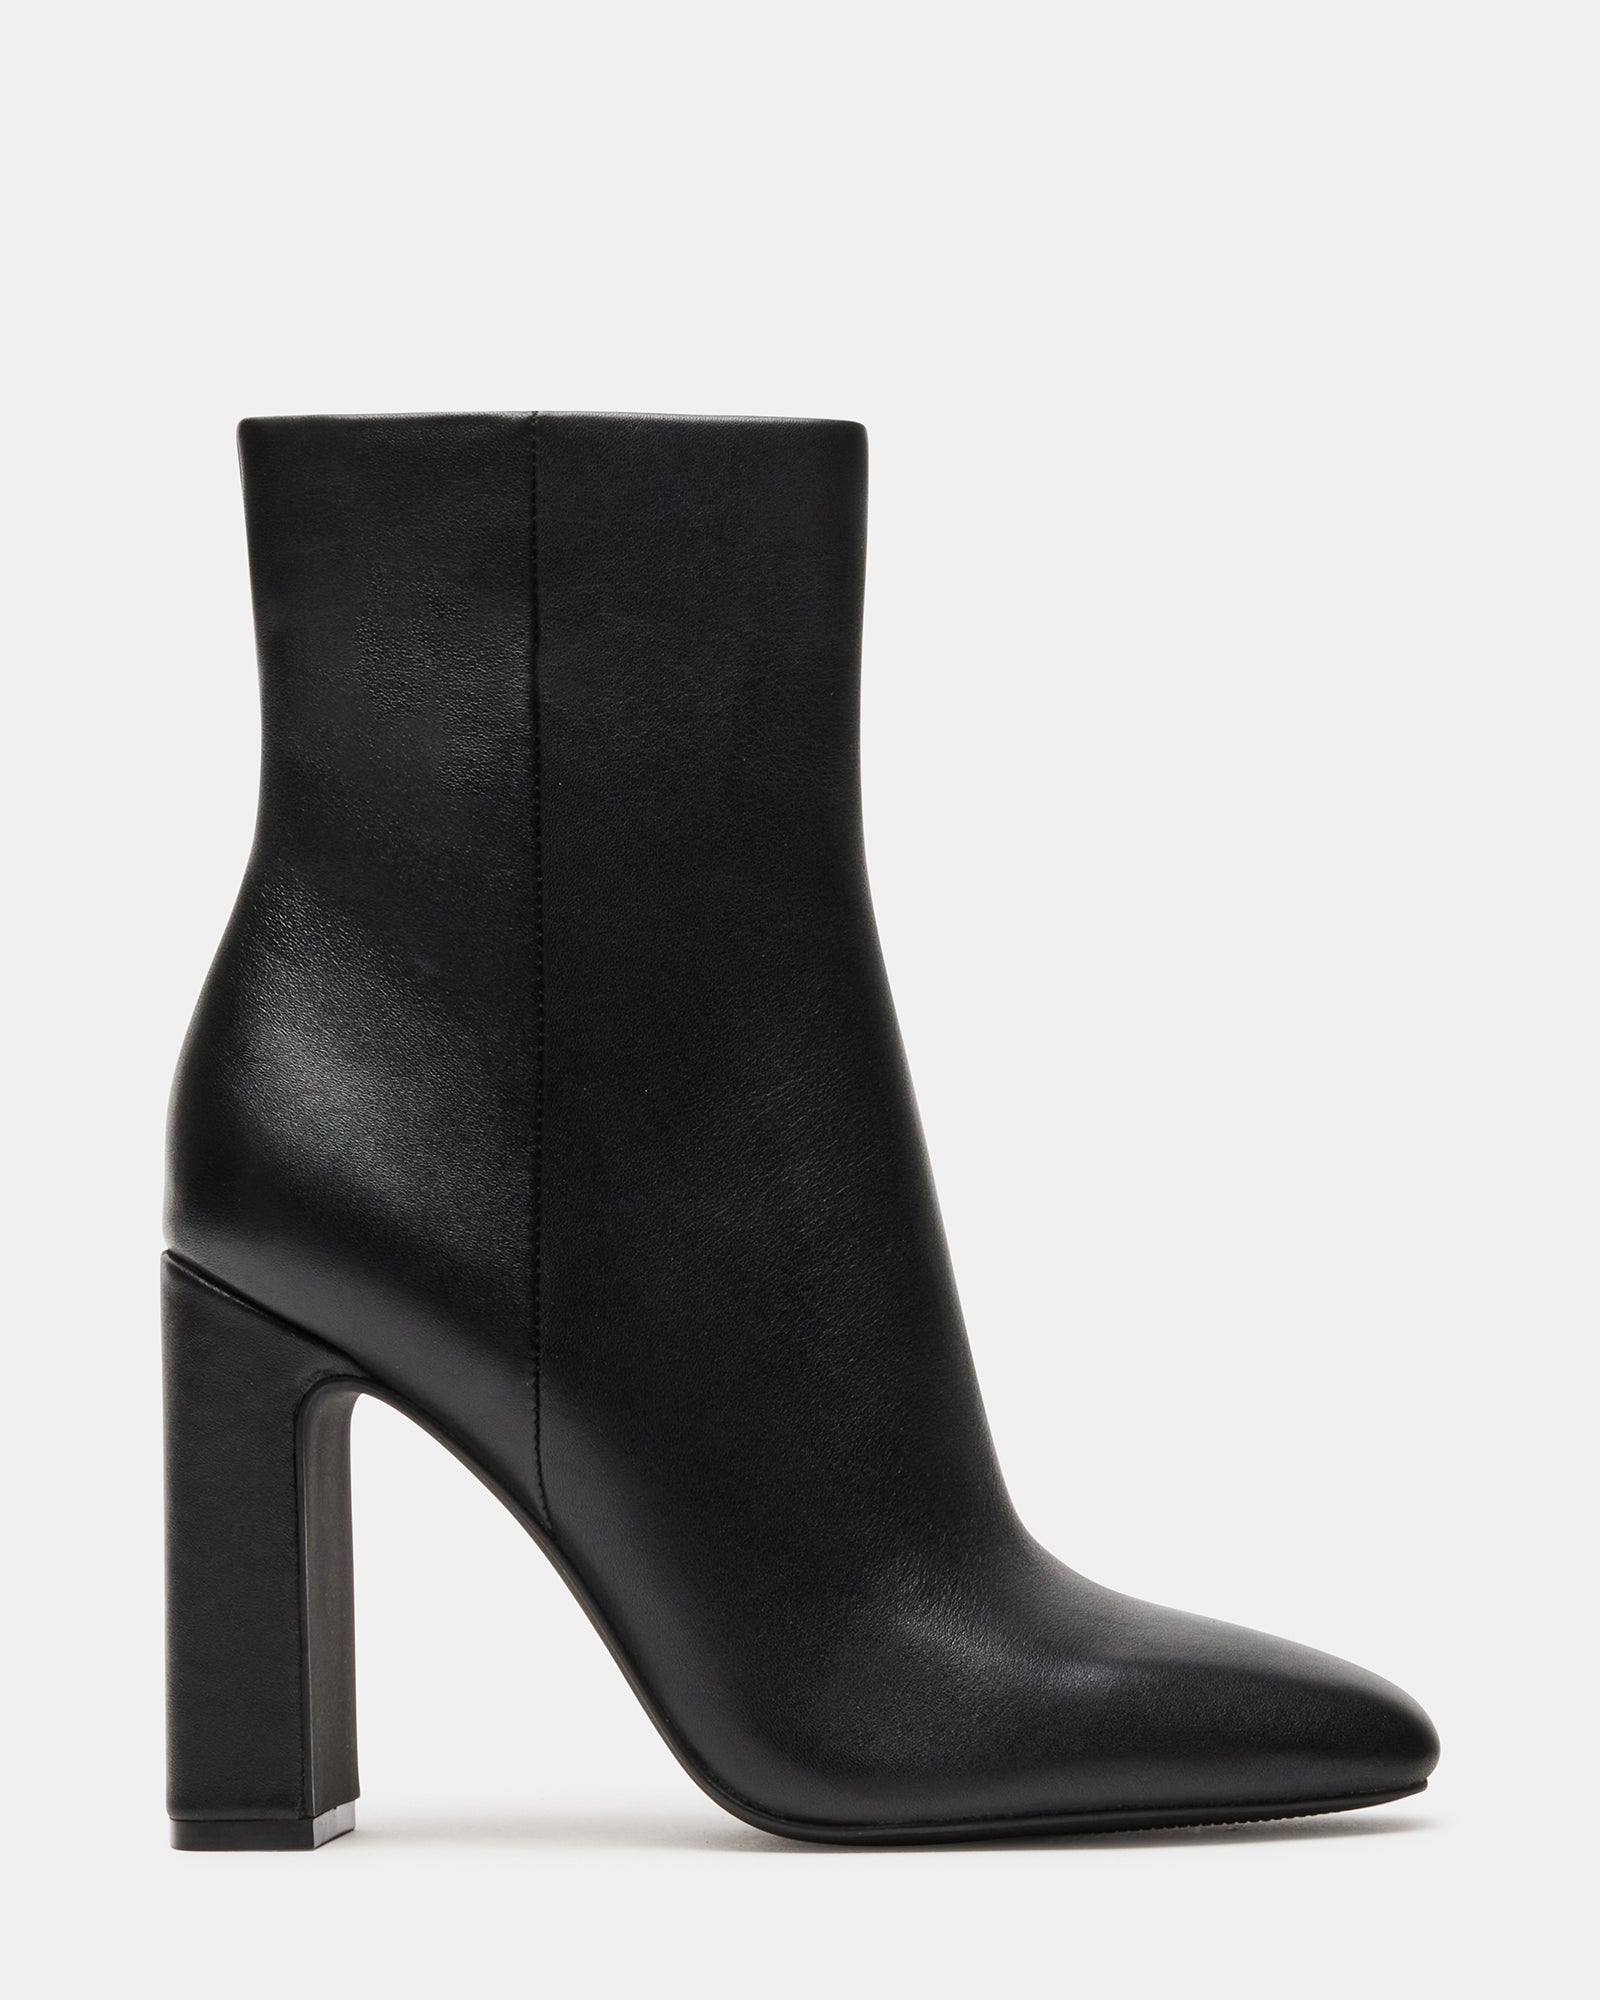 NICOLETTE Black Leather Pointed Toe Ankle Bootie